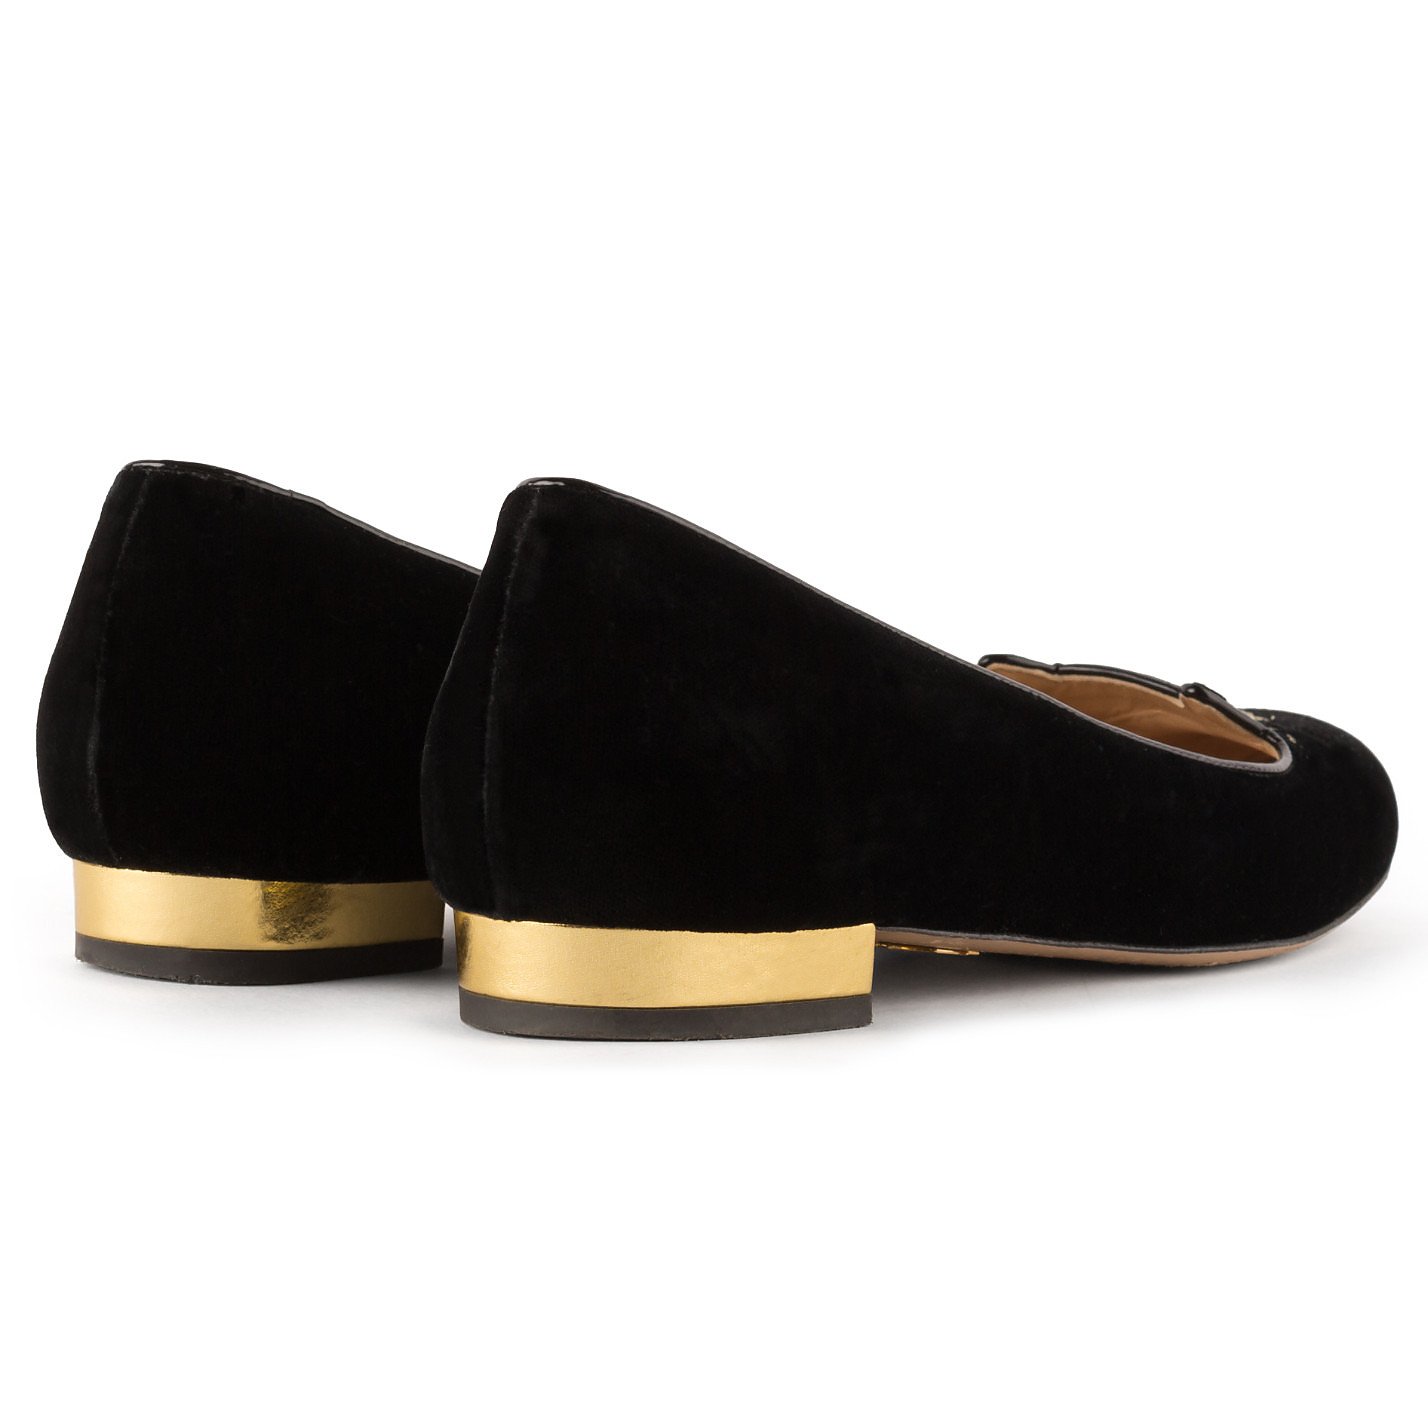 Charlotte Olympia Kitty Flat Shoes